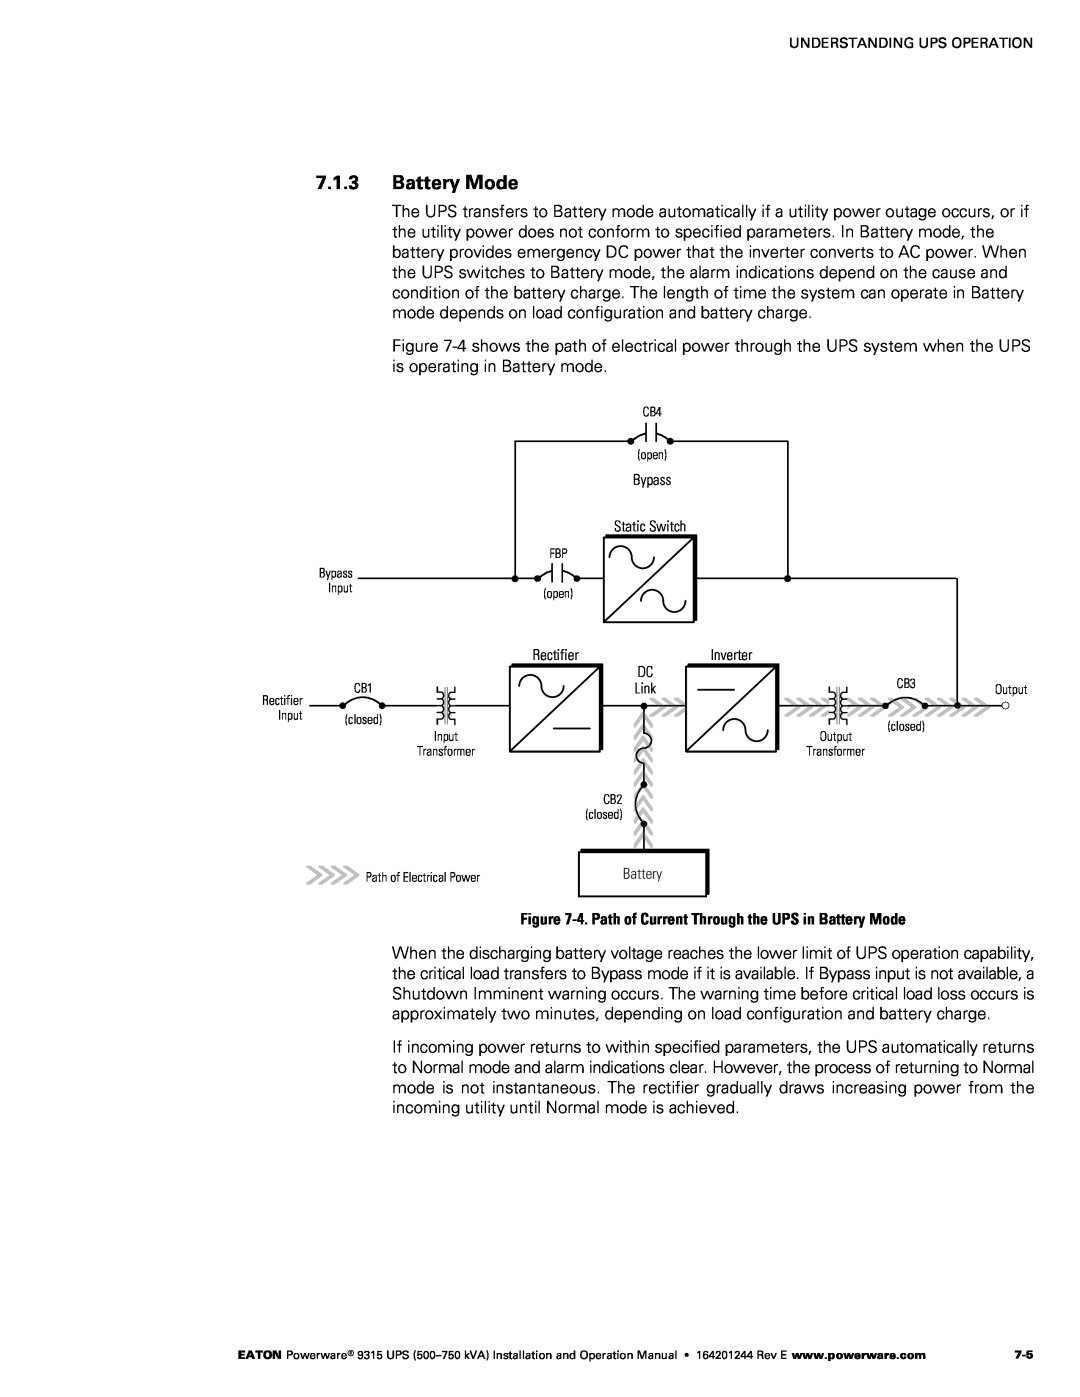 Powerware Powerware 9315 operation manual ‐4. Path of Current Through the UPS in Battery Mode 